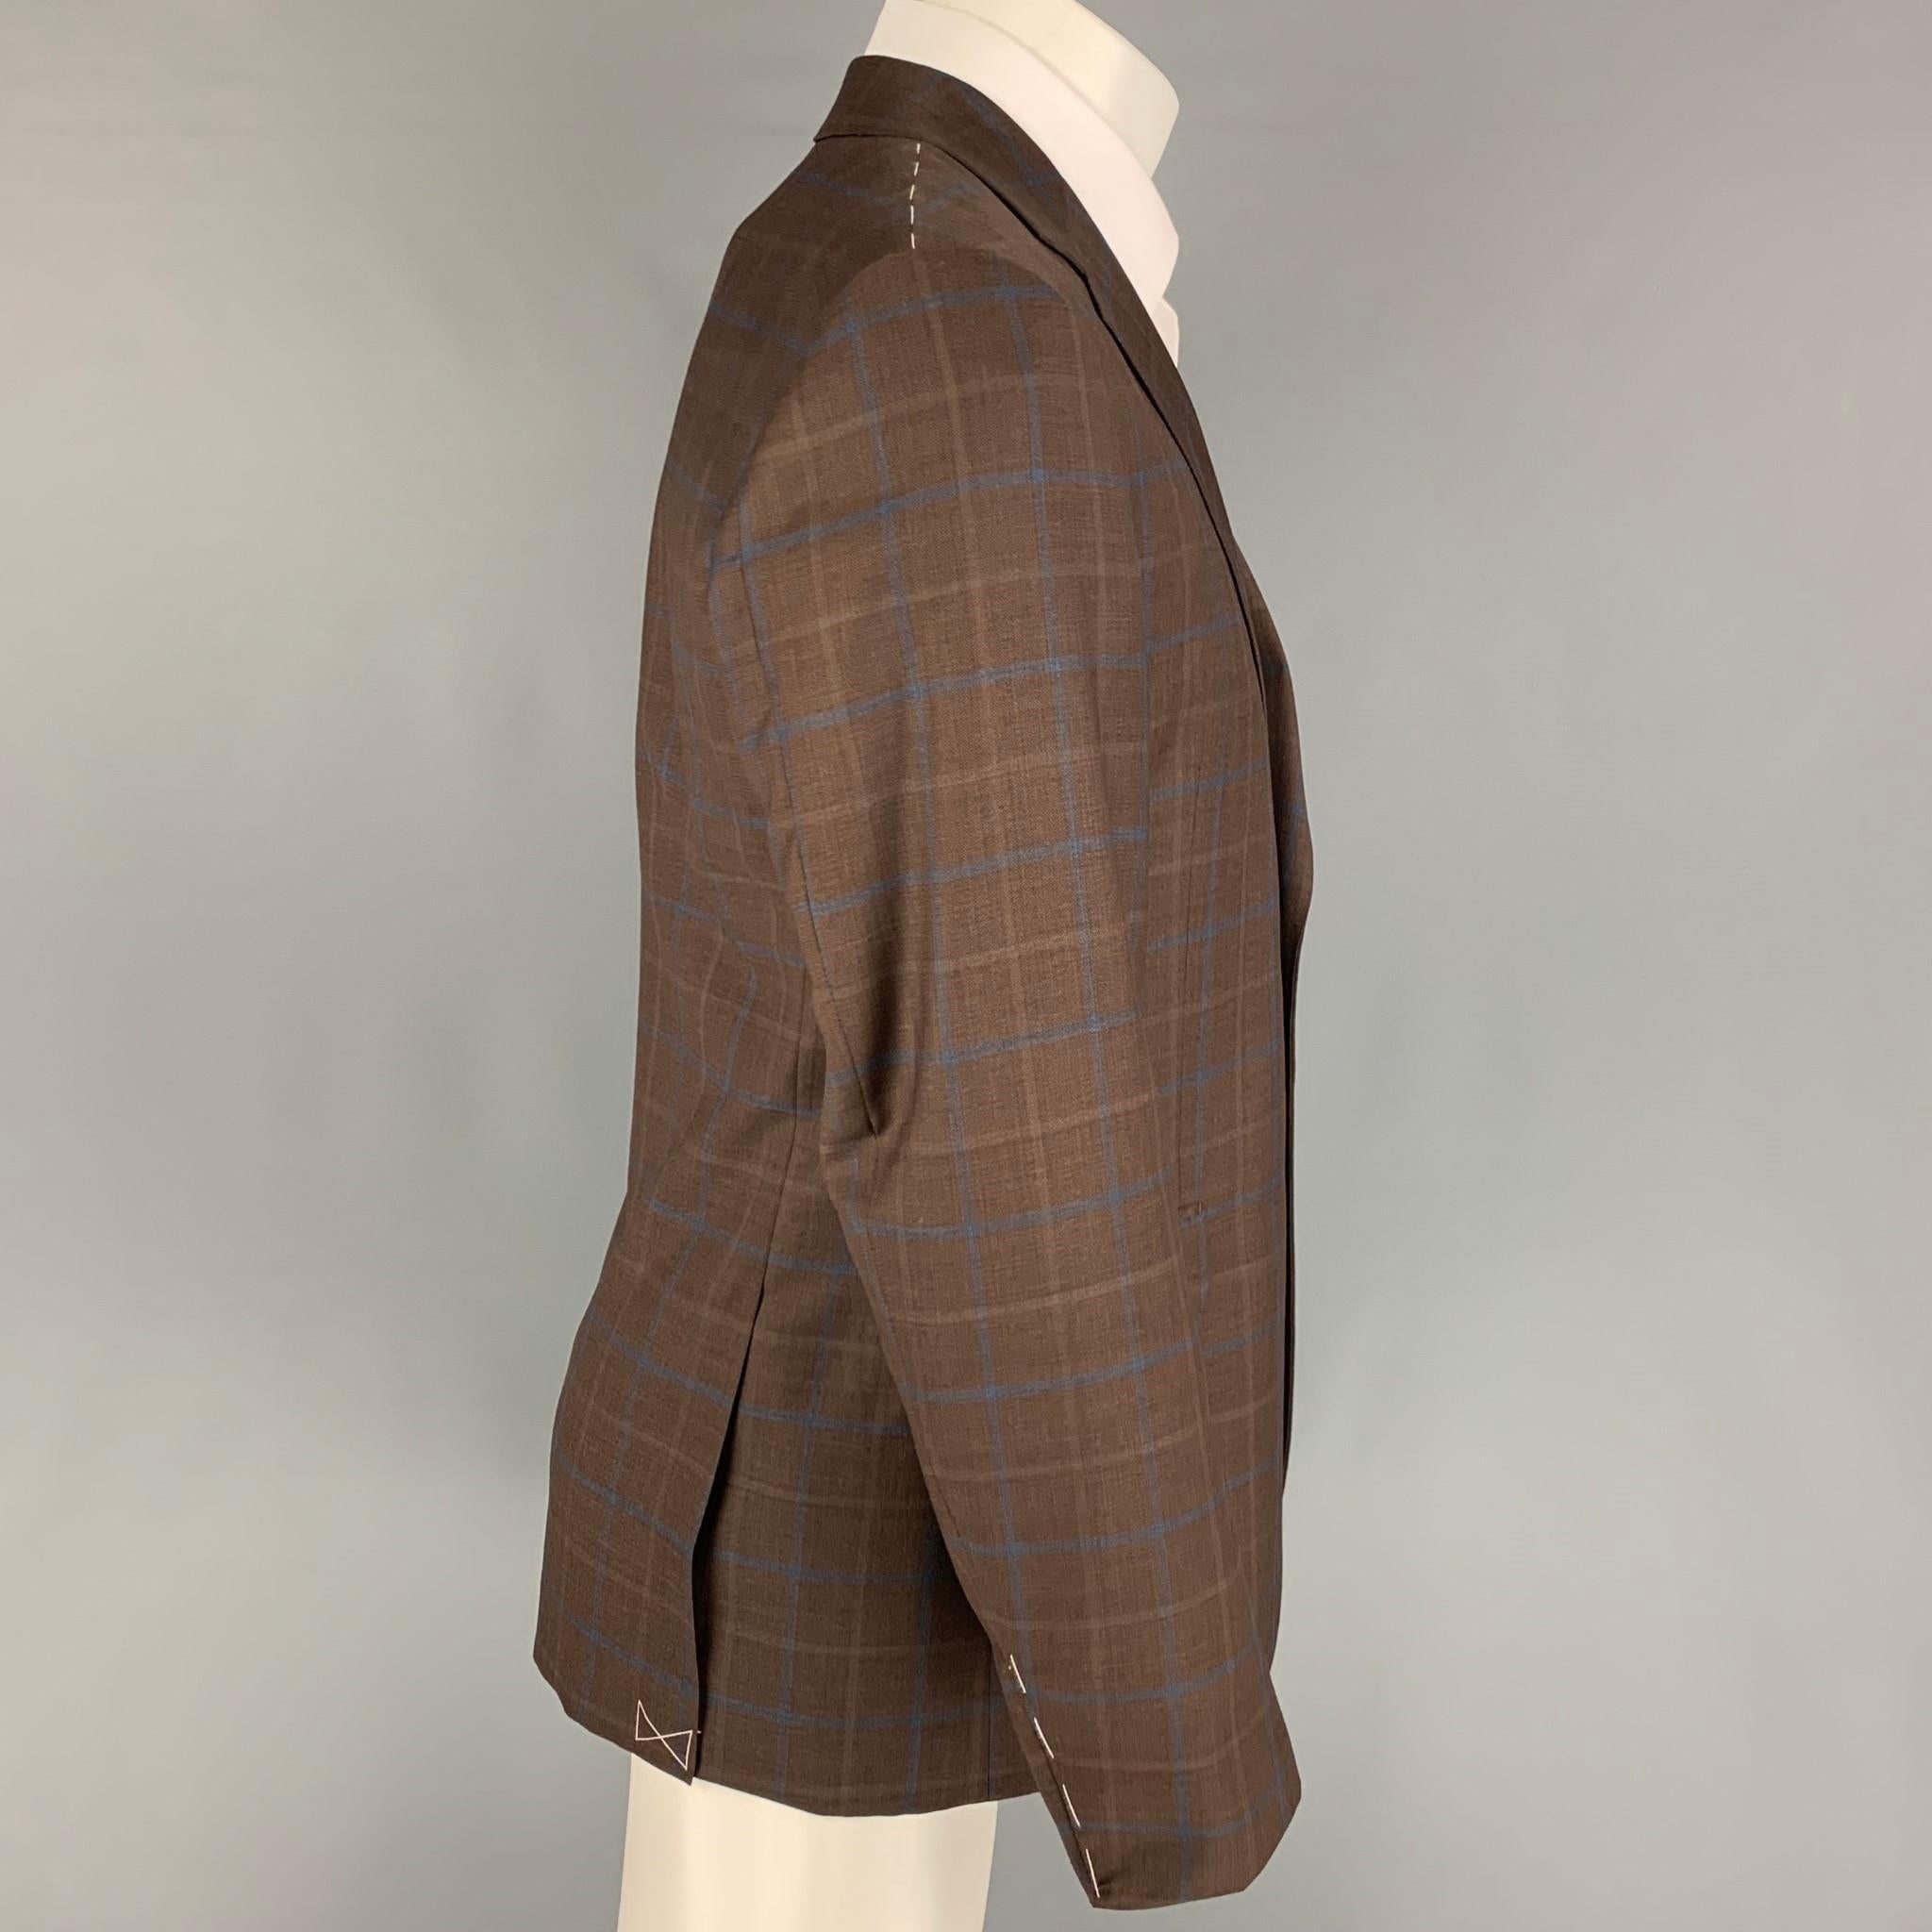 BARNEY'S NEW YORK sport coat comes in a brown & navy plaid wool / silk with a half liner featuring a notch lapel, flap pockets, double back vent, and a double button closure. Comes with tags.

Excellent Pre-Owned Condition.
Marked: